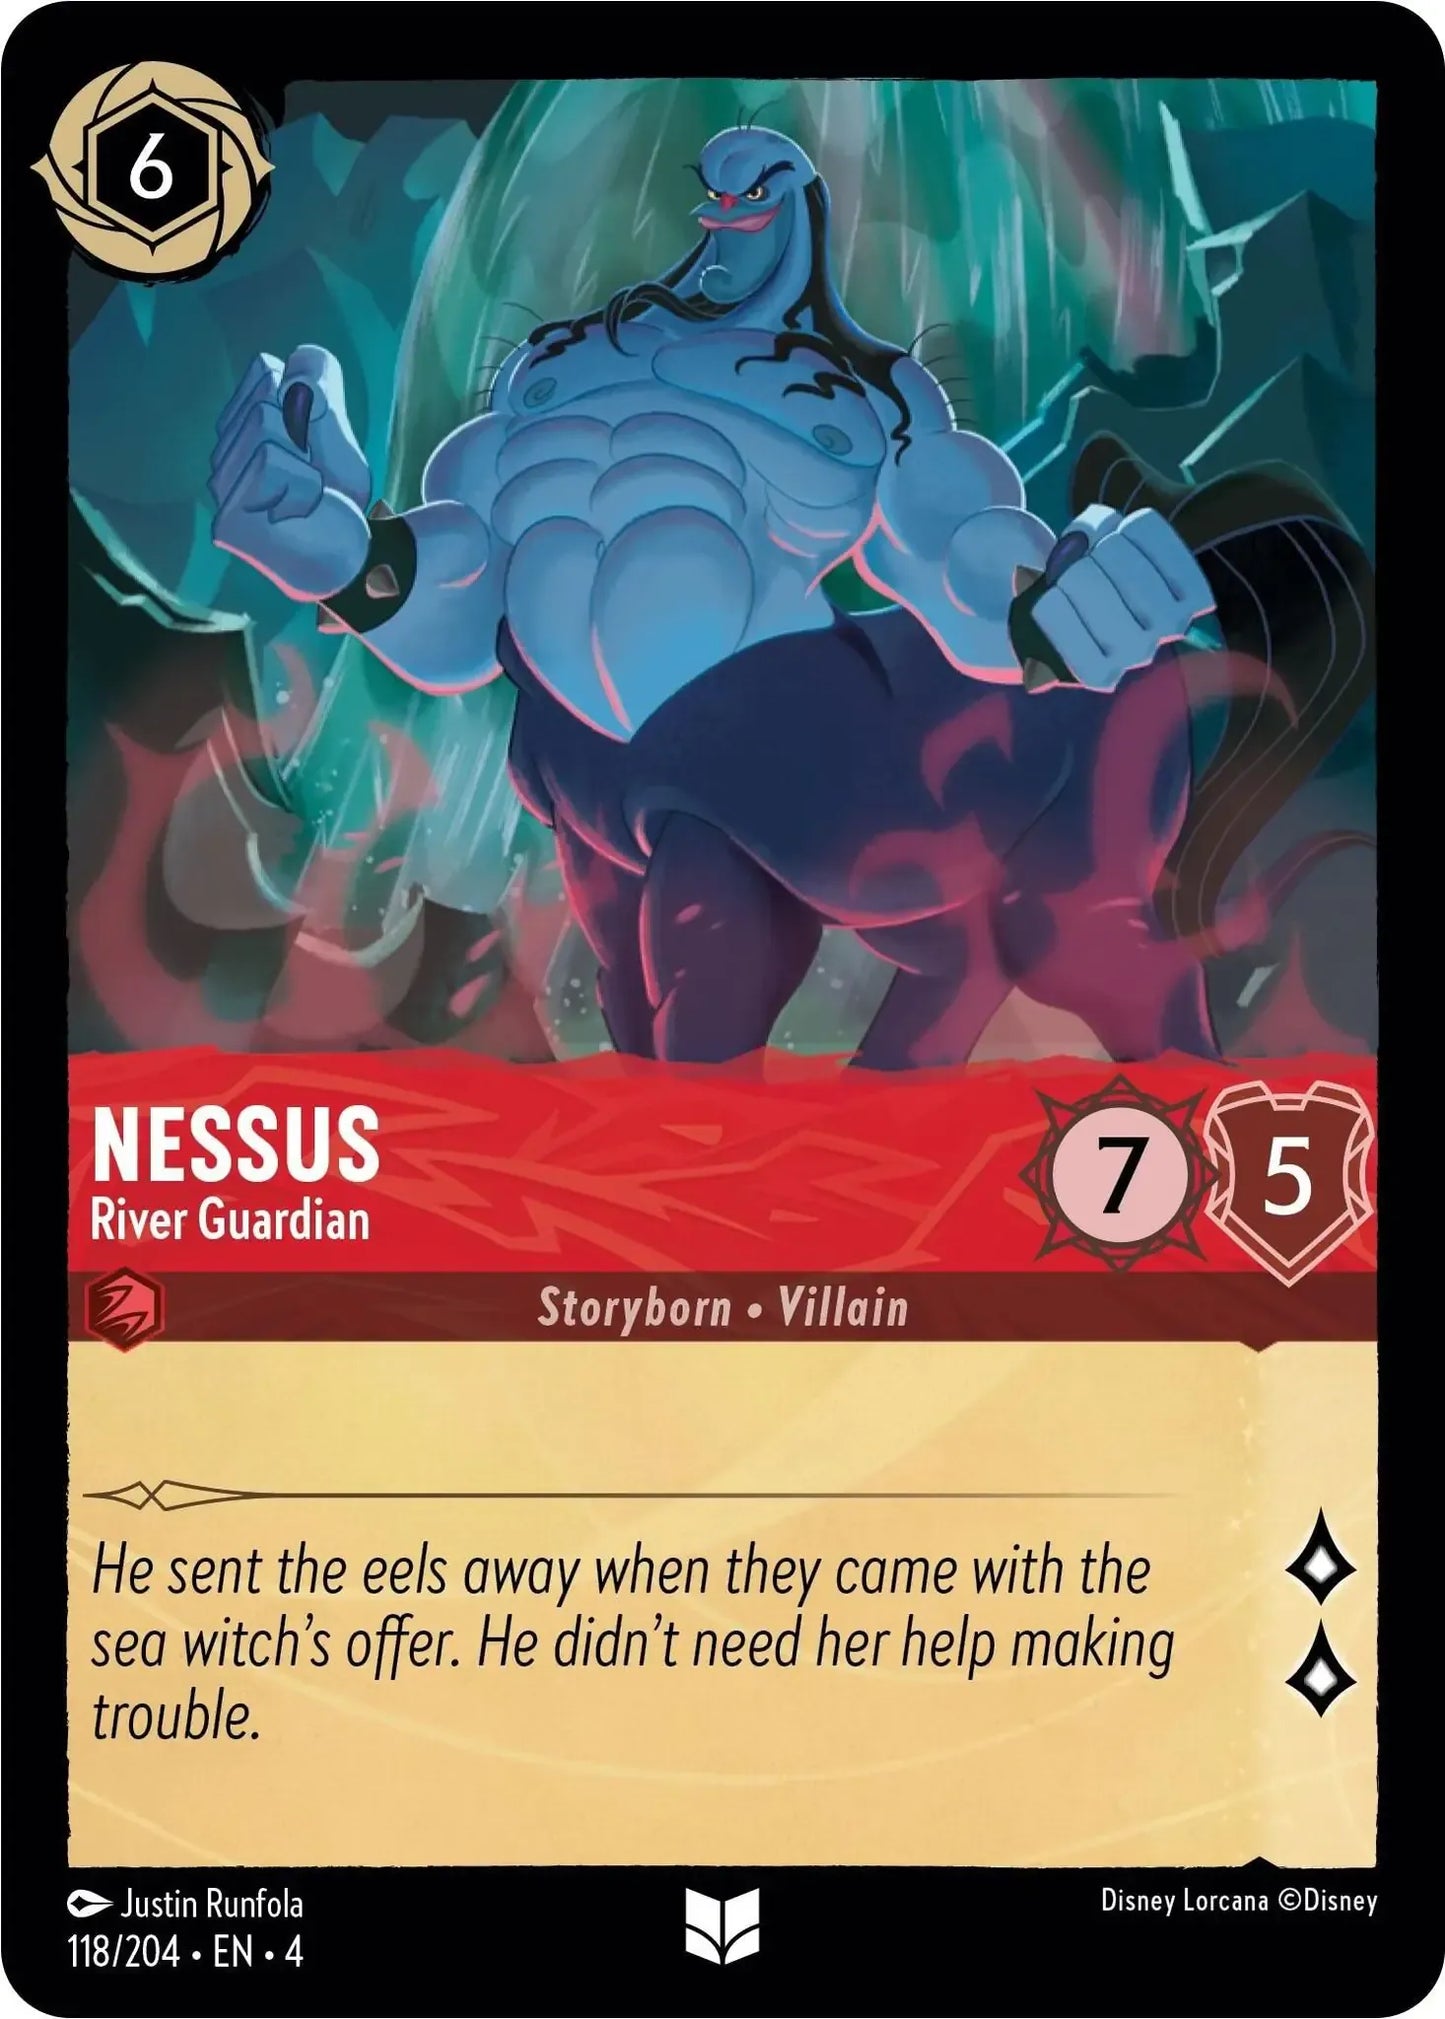 Nessus - River Guardian